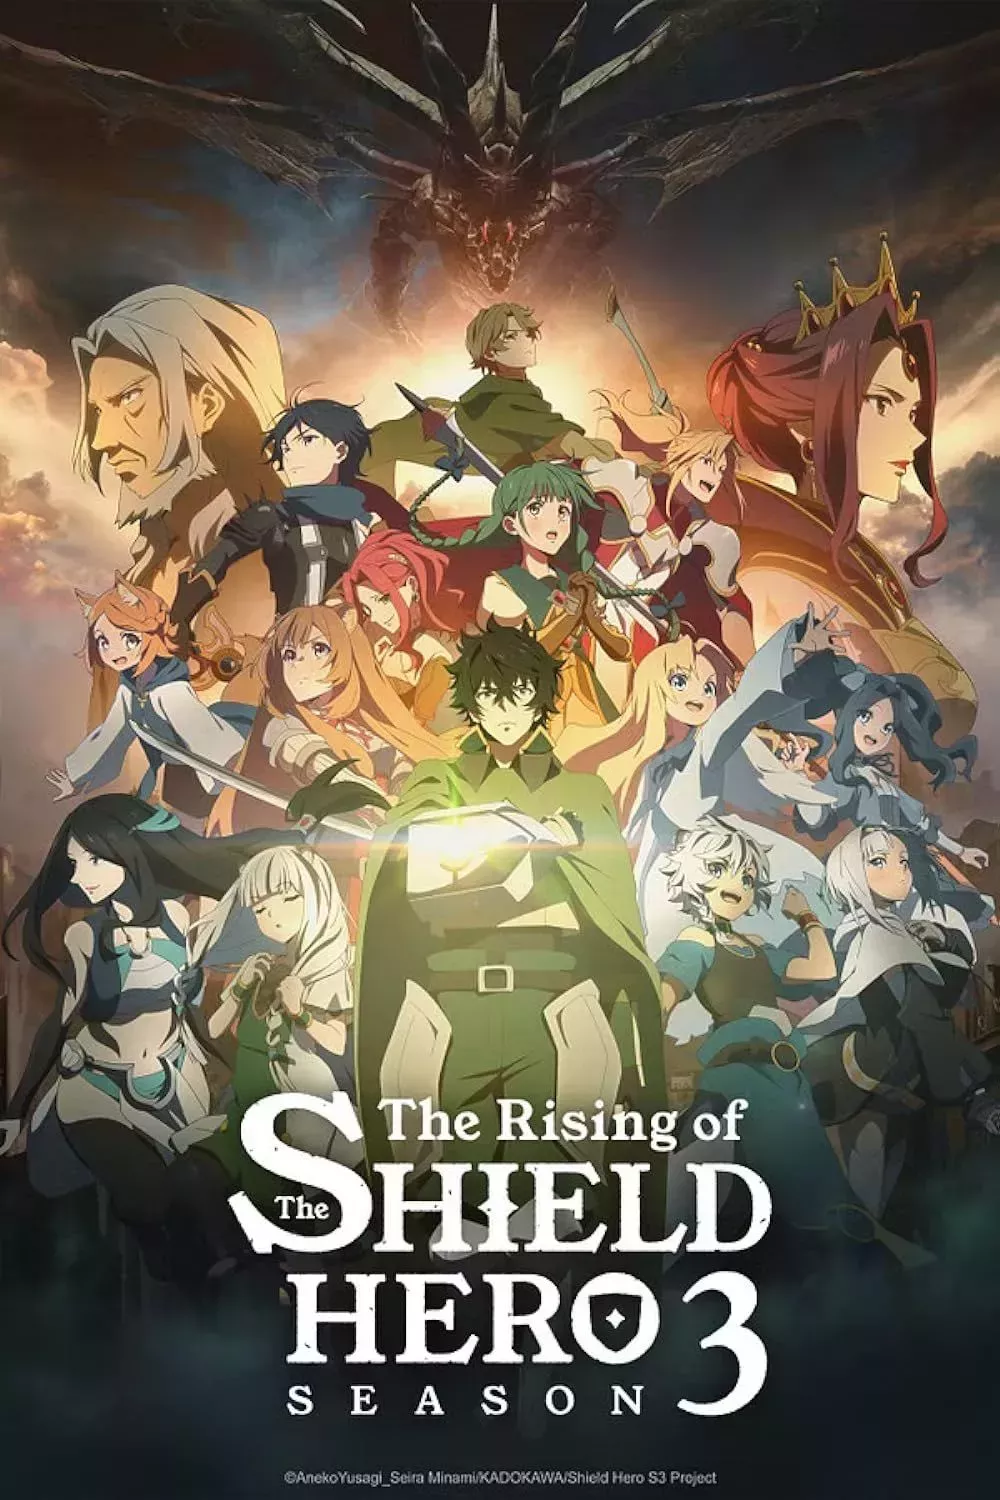 The cast of characters posing in Rising of the Shield Hero Season 3 Poster